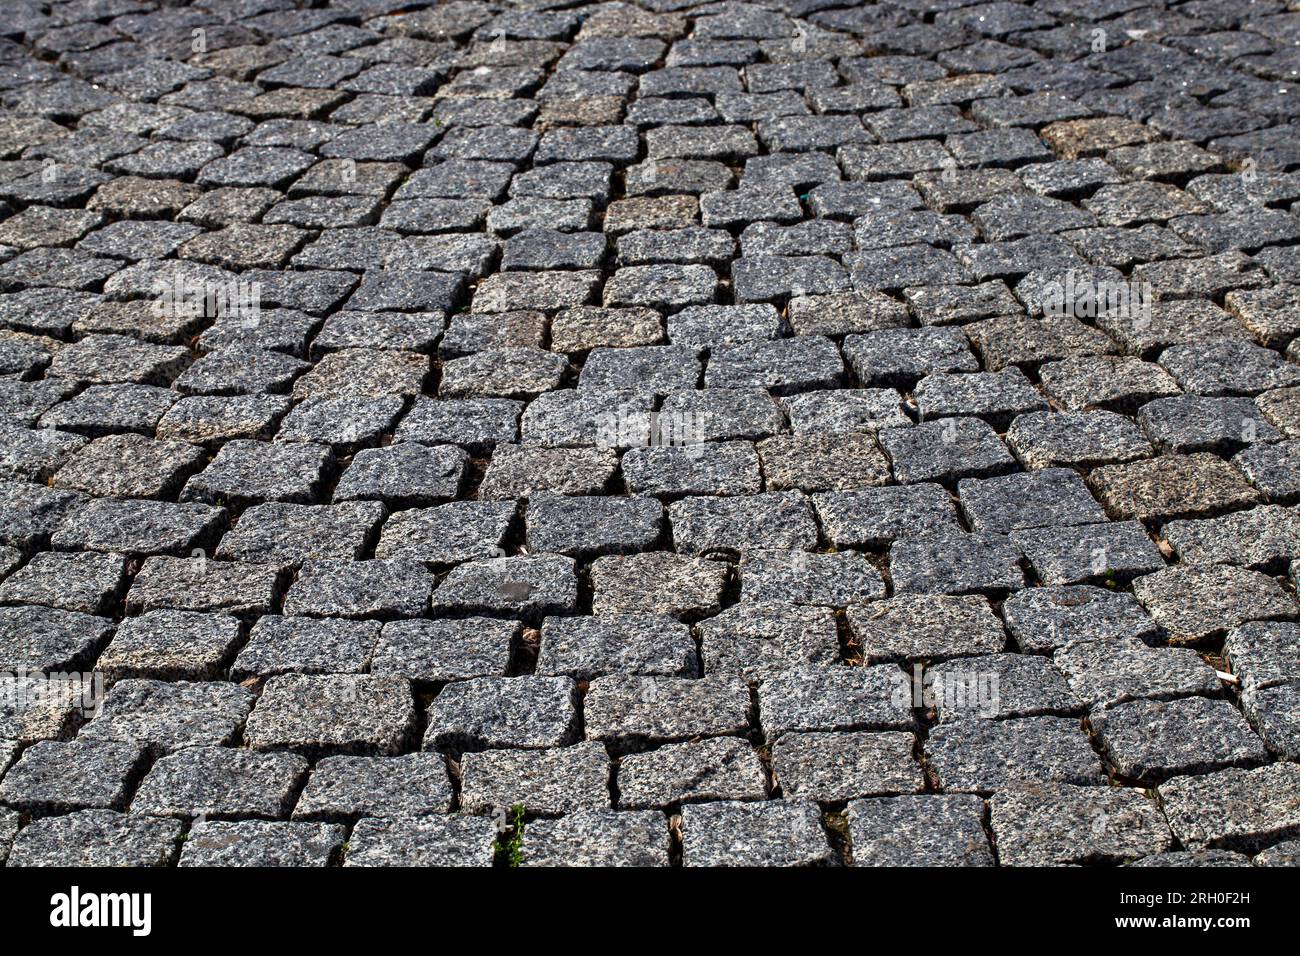 part of the highway made of concrete slabs and tiles, part of the road for cars made of tiles Stock Photo